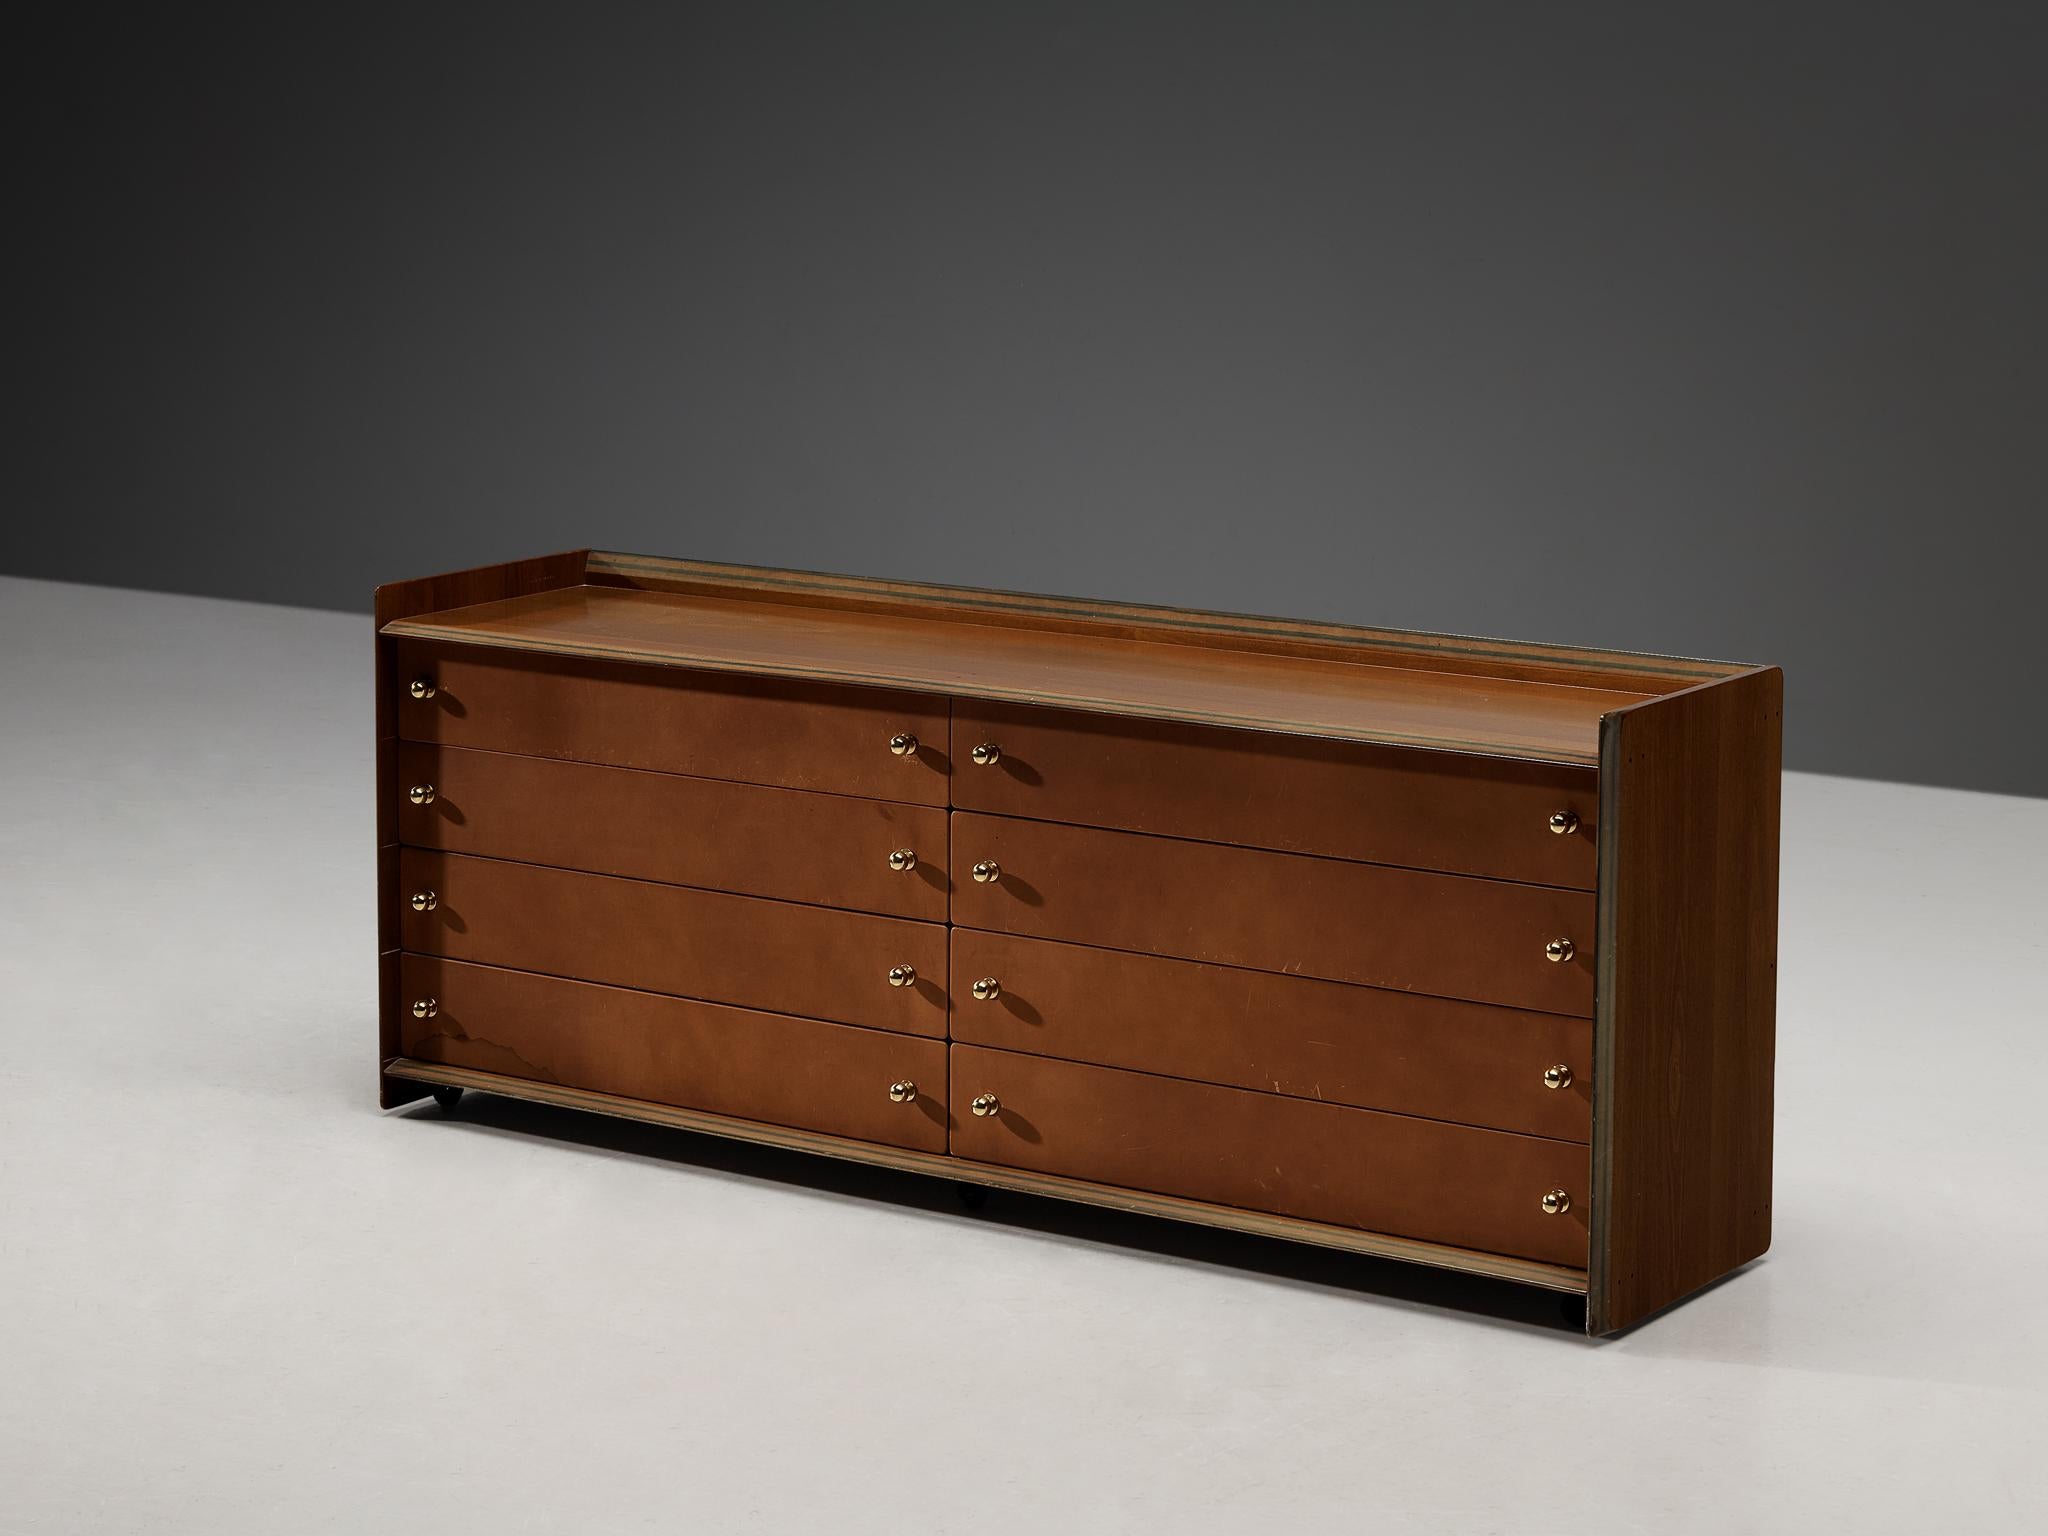 Afra & Tobia Scarpa for Maxalto, 'Artona' chest of drawers, walnut, brass, leather, ebony, Italy, 1975/1979

This piece of furniture is part of the Artona line by Afra & Tobia Scarpa. The front is executed in a delicate terracotta leather.